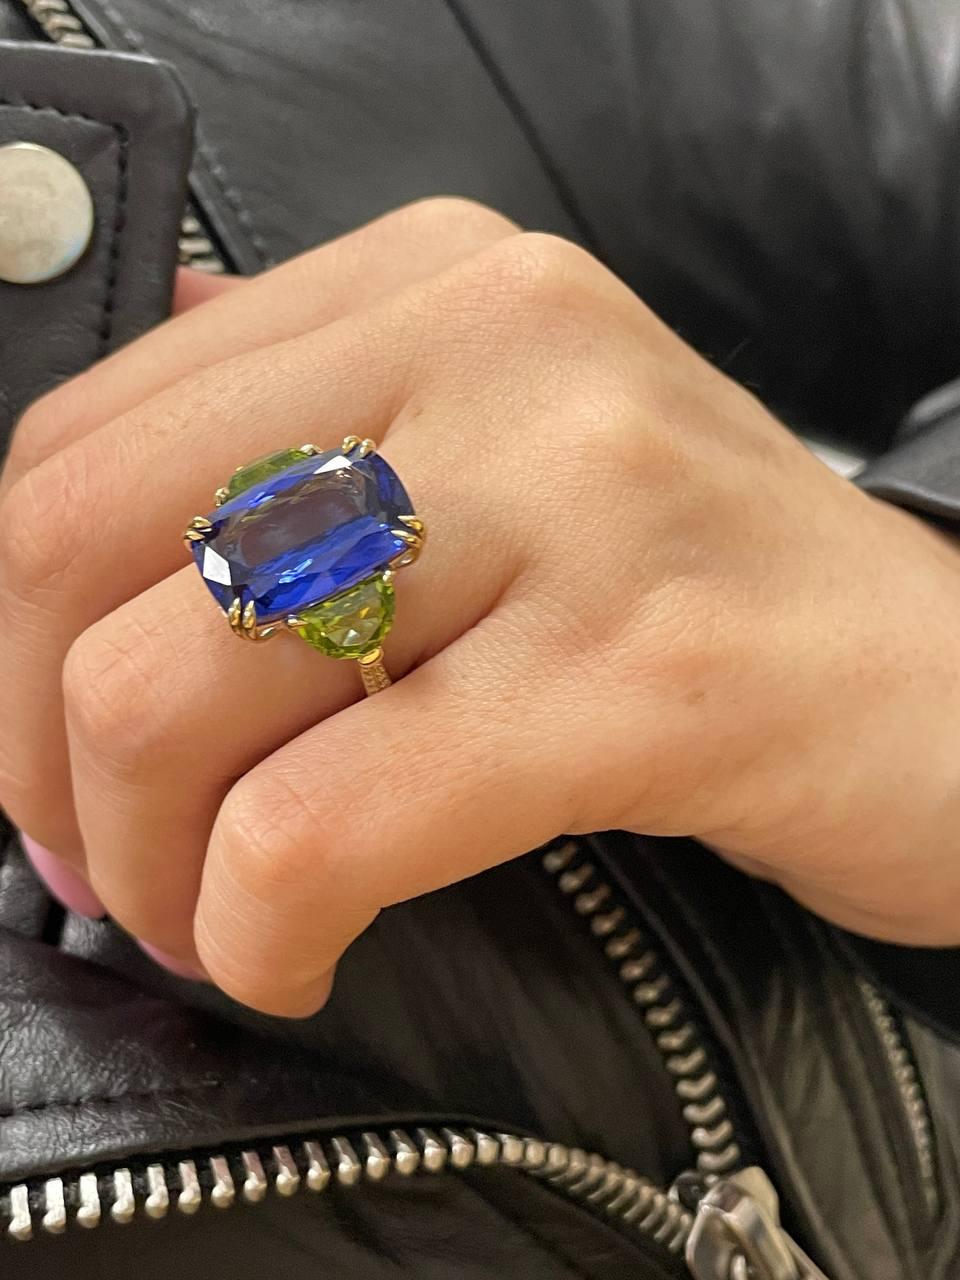 GIA 17.23ct Deep Blue Violet Cushion Tanzanite Peridot and Diamond Trilogy Ring For Sale 1